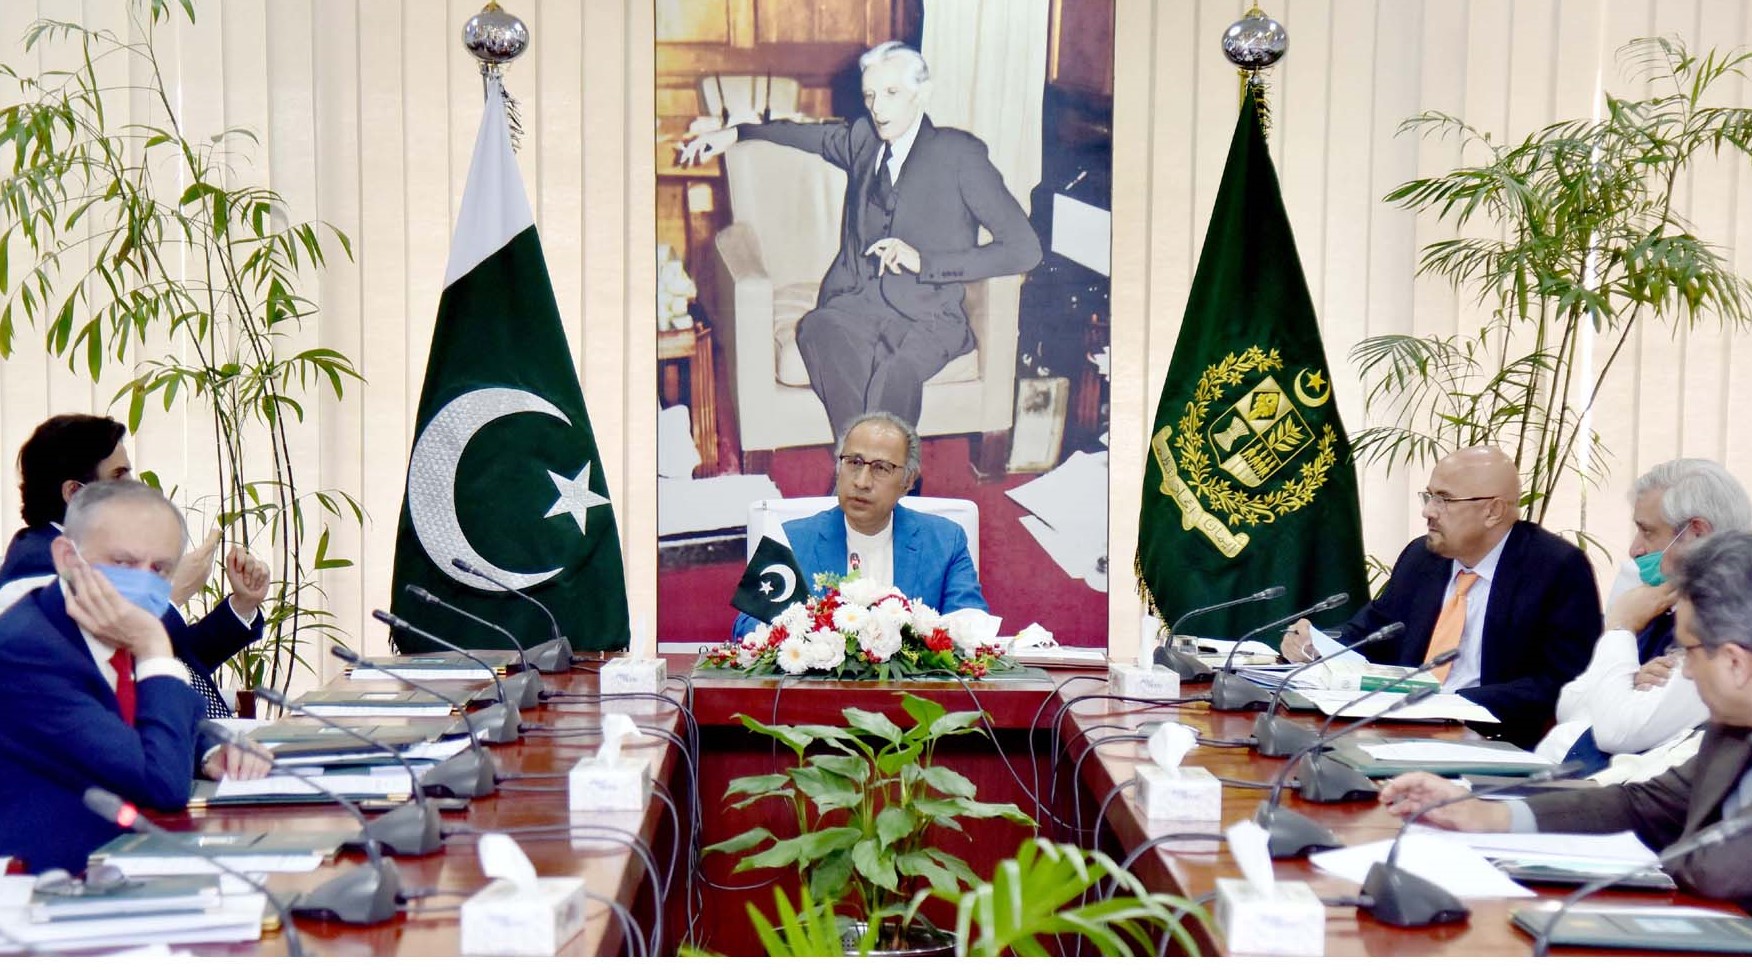 ADVISER TO THE PRIME MINISTER ON FINANCE AND REVENUE DR. ABDUL HAFEEZ SHAIKH CHAIRING SPECIAL MEETING OF THE ECONOMIC COORDINATION COMMITTEE OF THE CABINET (ECC) IN ISLAMABAD ON APRIL 13, 2020.